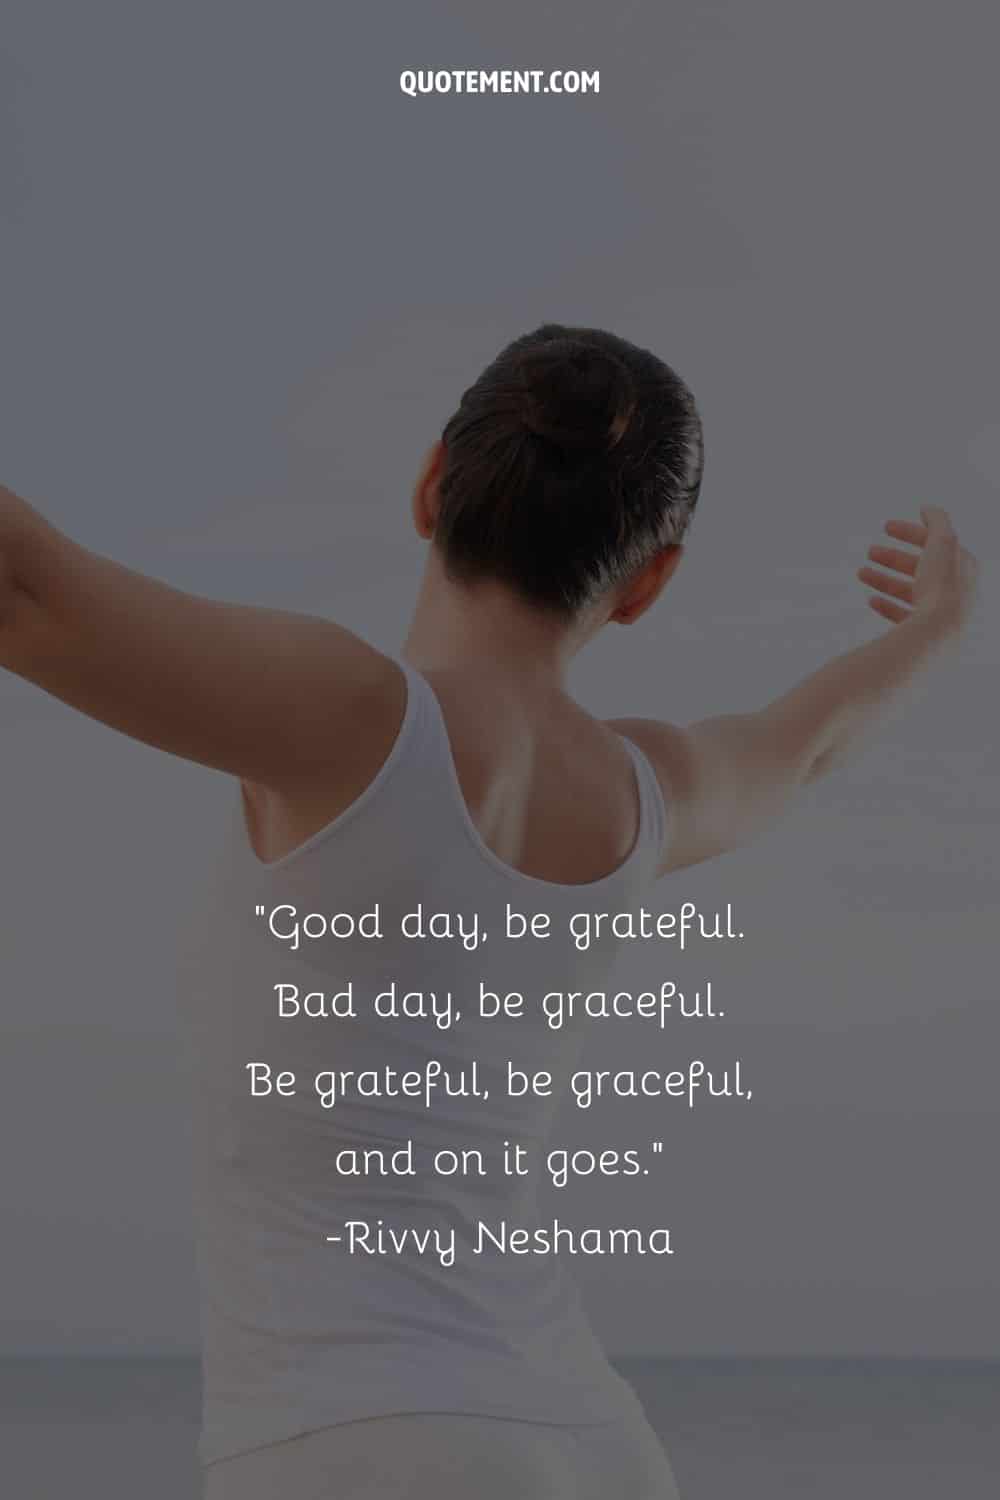 Good day, be grateful. Bad day, be graceful. Be grateful, be graceful, and on it goes